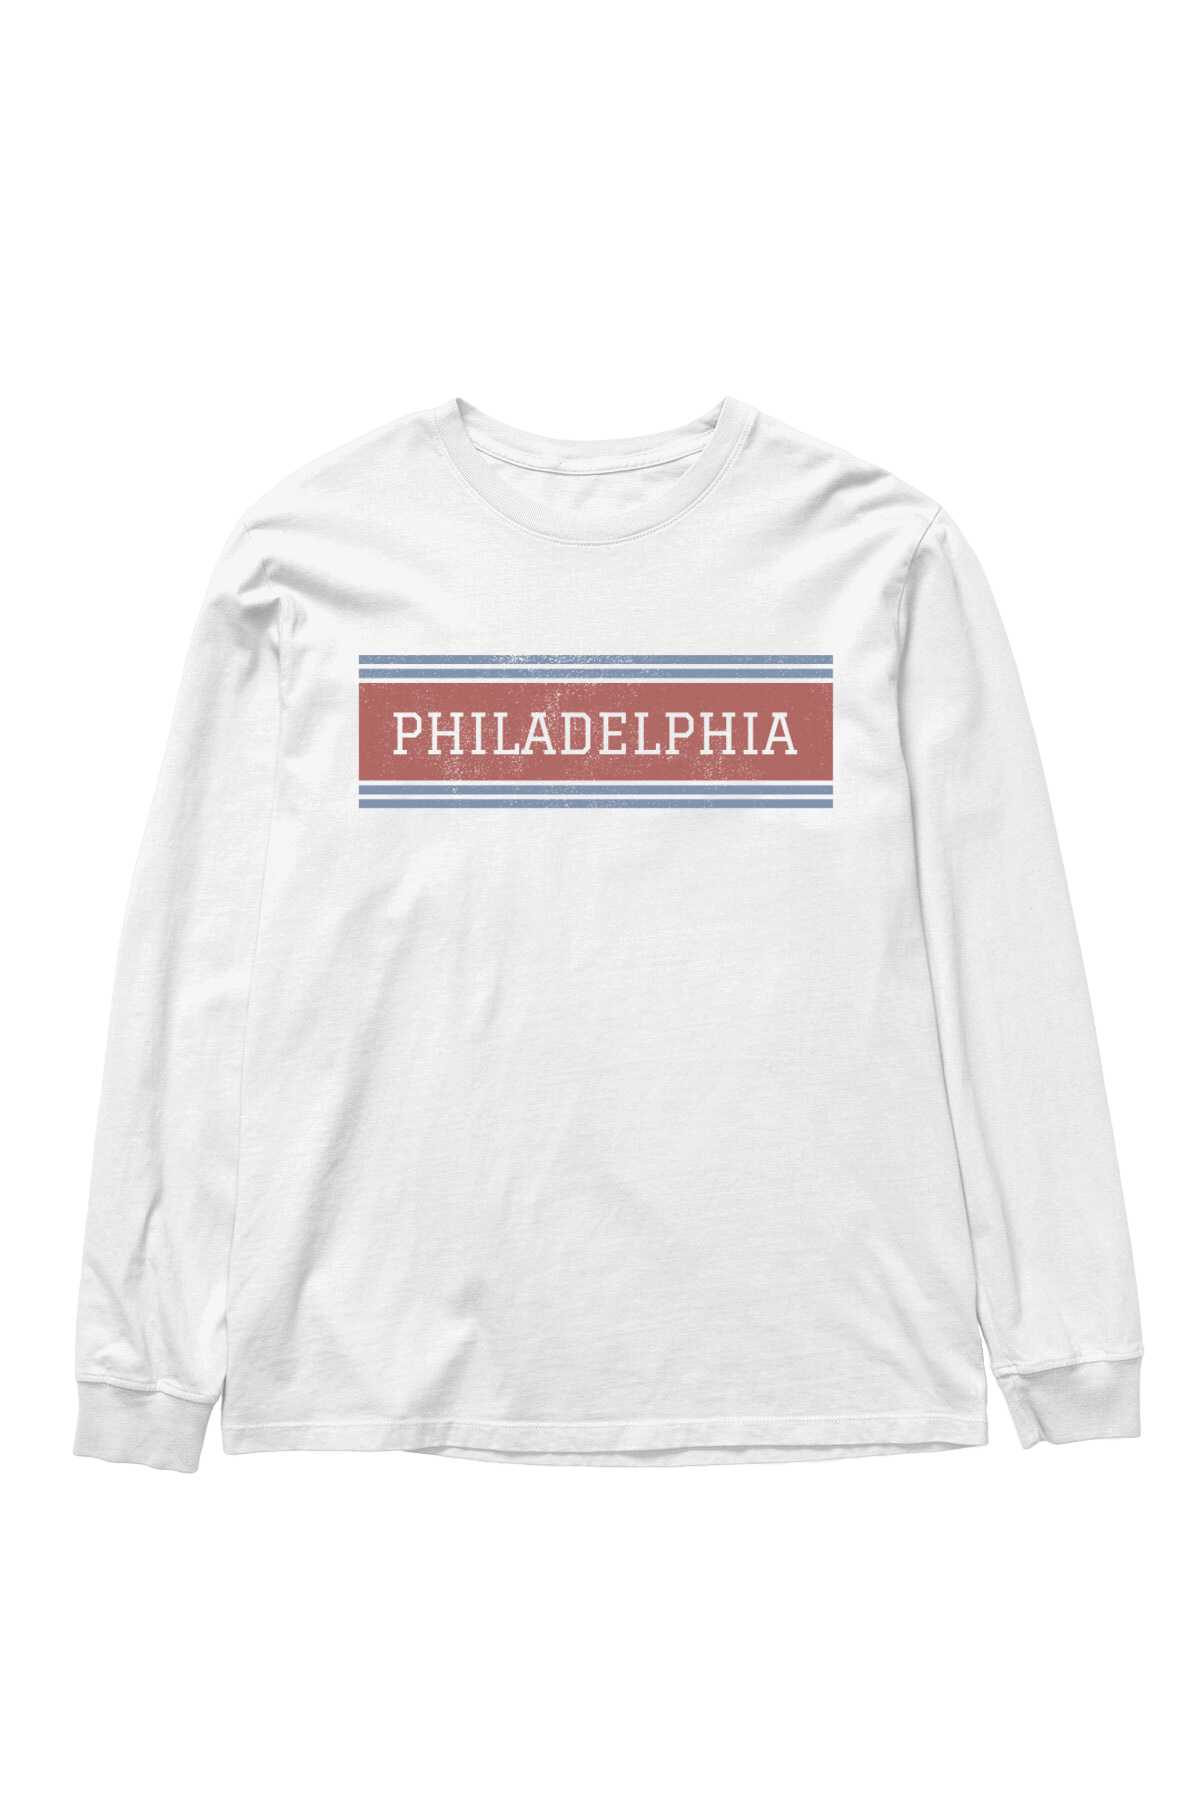 Boathouse Philly Love Long Sleeve White / Small